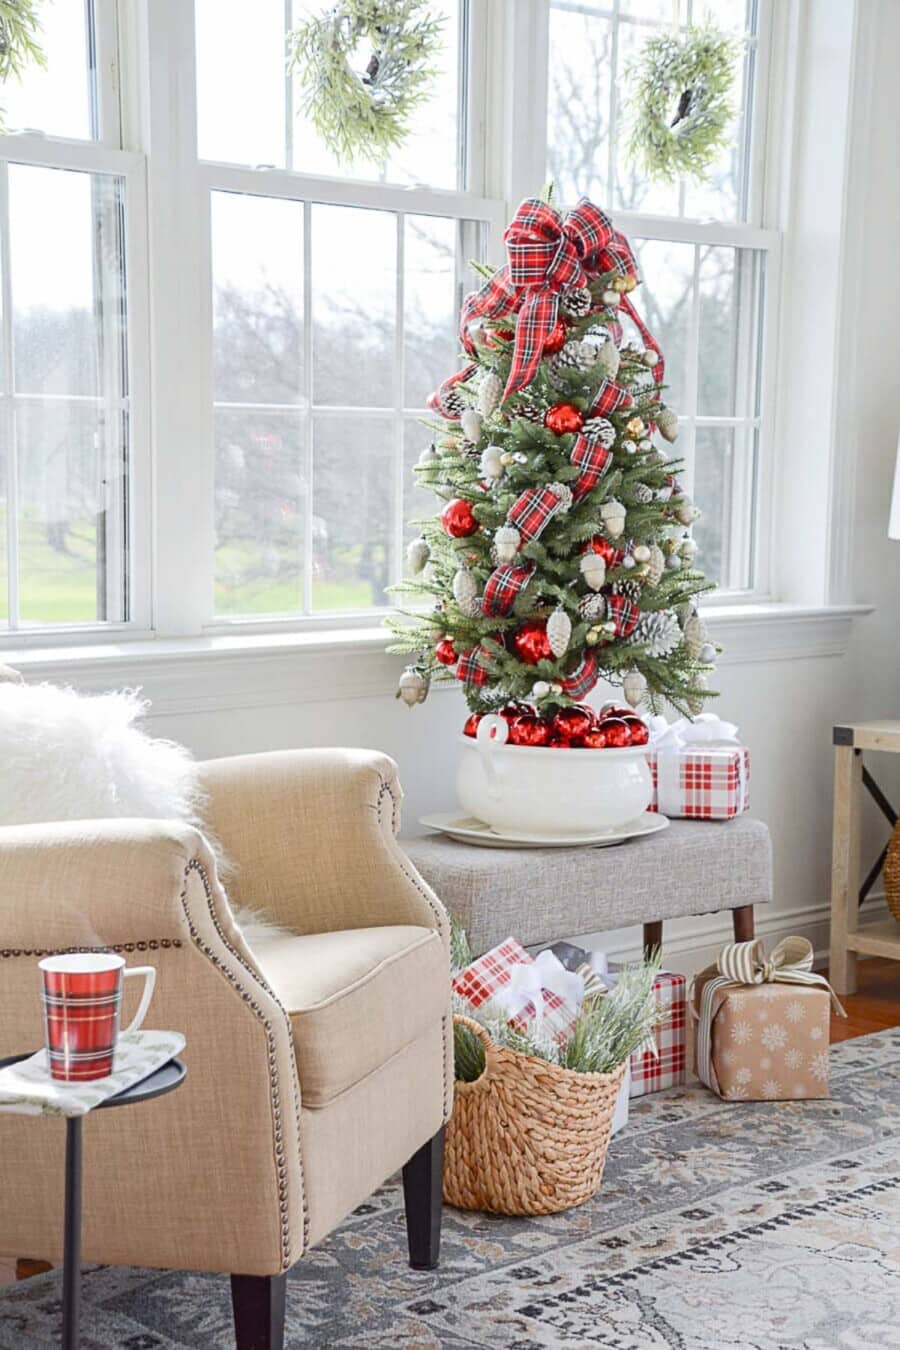 Festive Tabletop Christmas Trees For Every Room- The Ultimate Guide